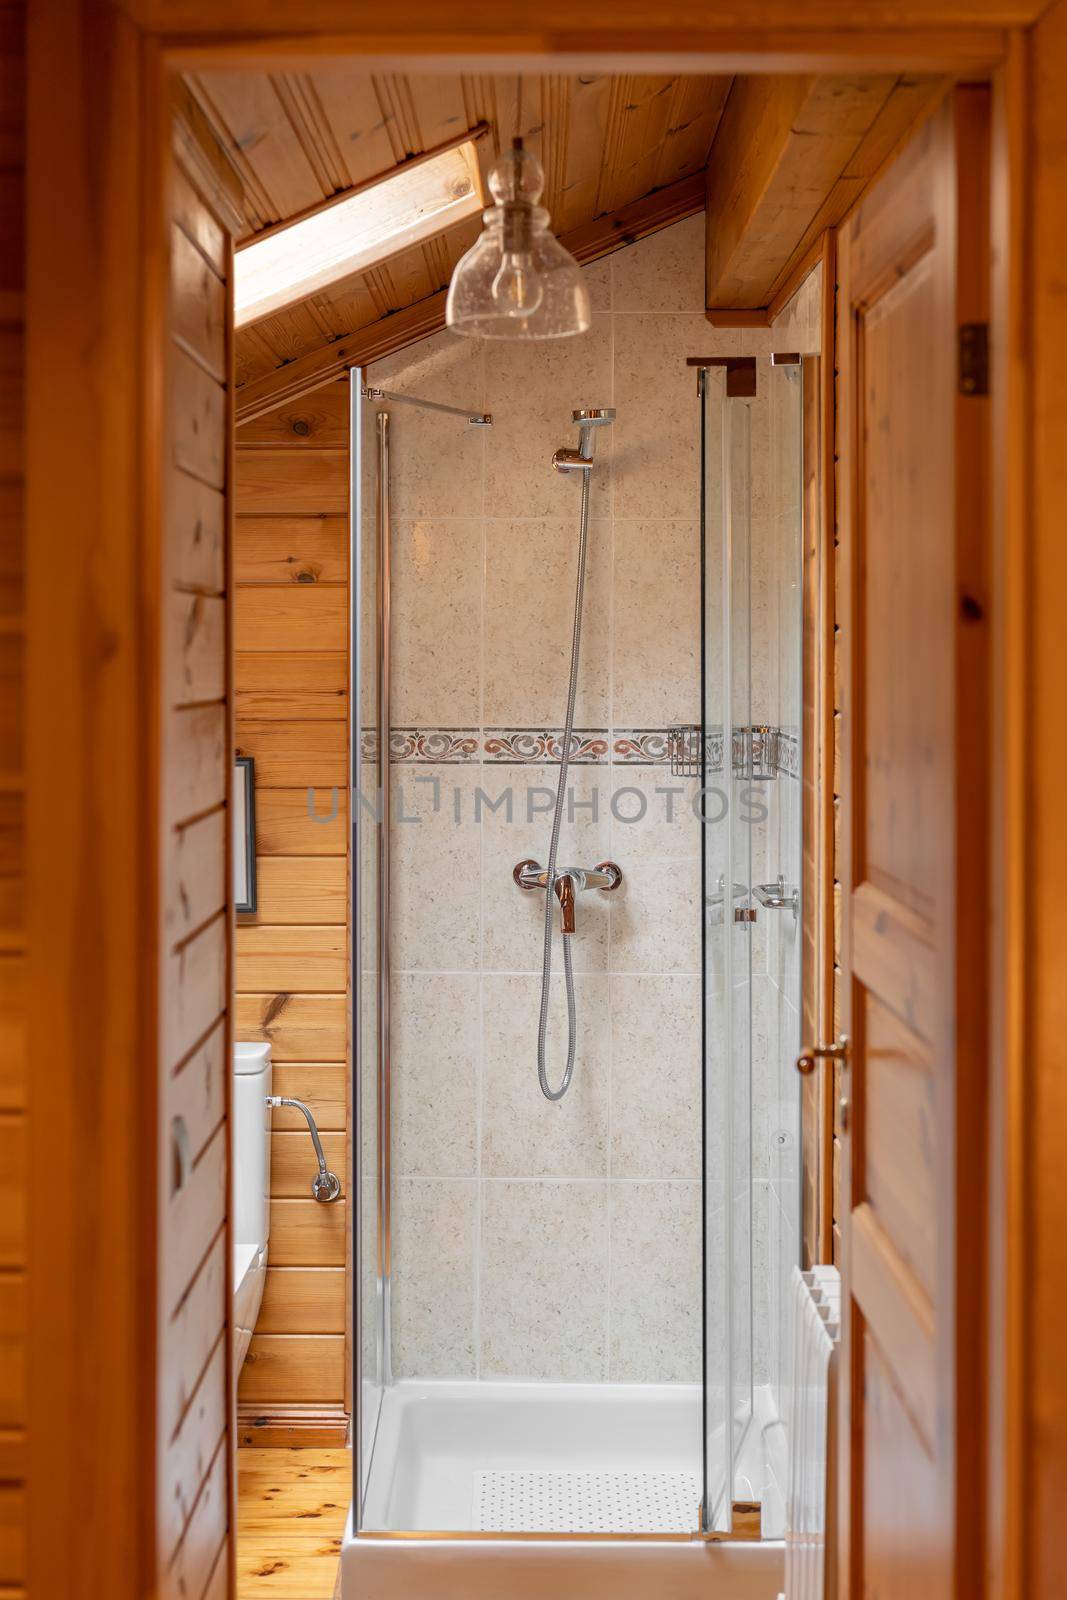 Interior of bathroom in country style. Shower cabin with wooden walls.